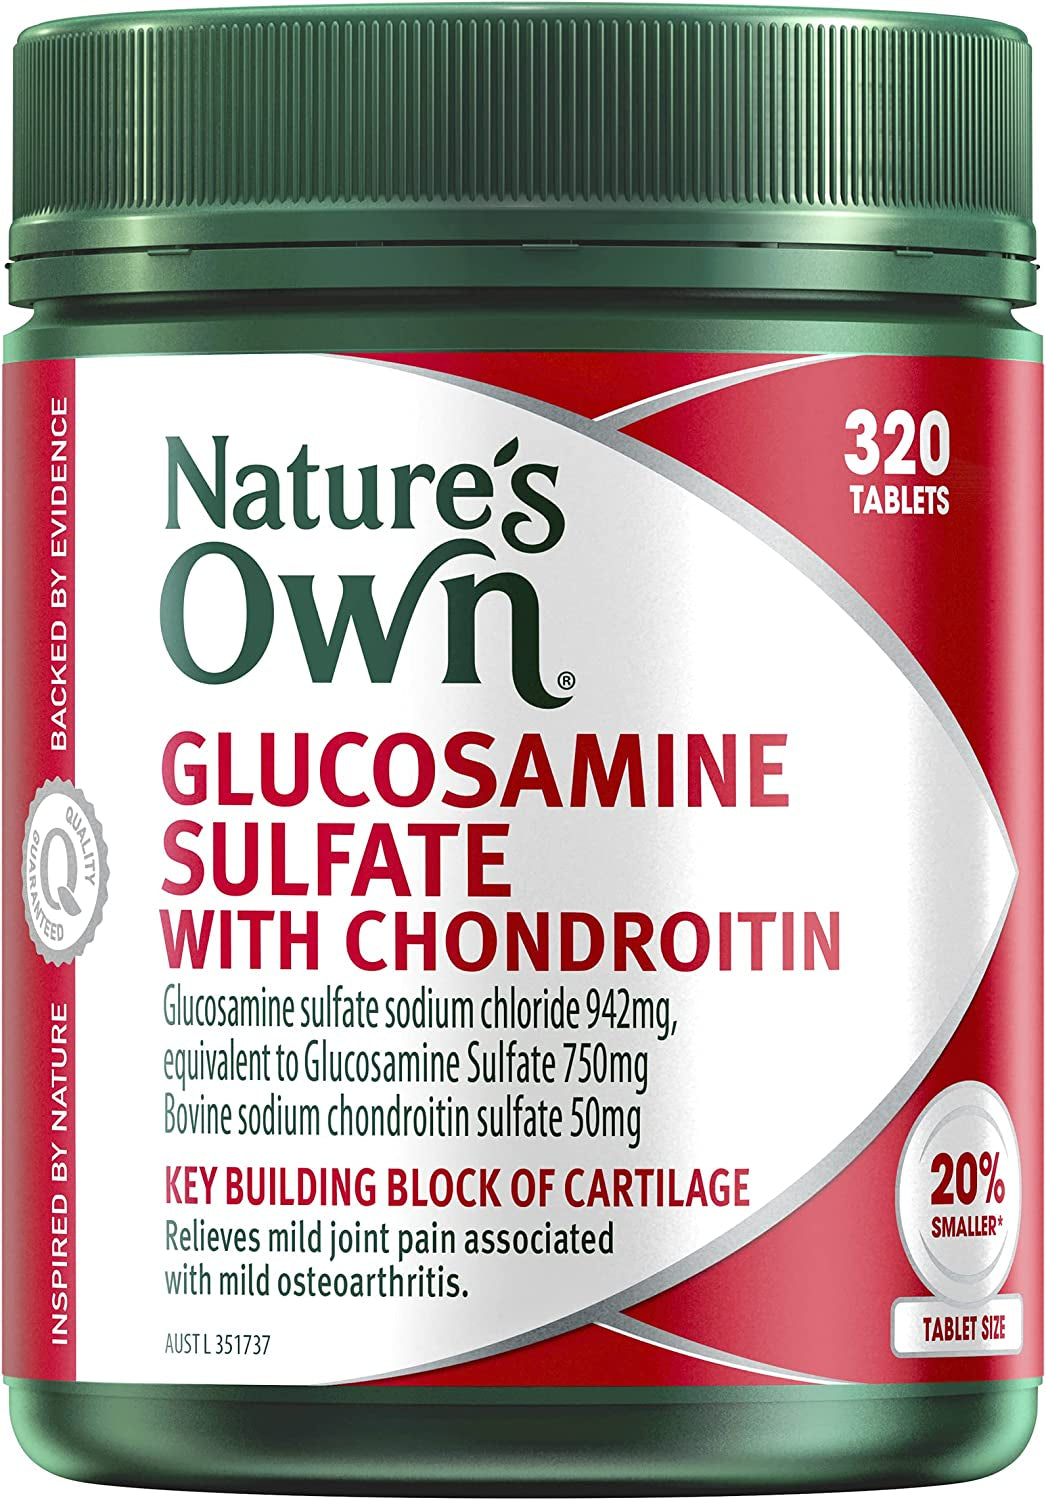 Glucosamine Sulfate and Chondroitin for Joint Health - Relieves Mild Joint Pain and Stiffness Associated with Mild Osteoarthritis, 320 Tablets